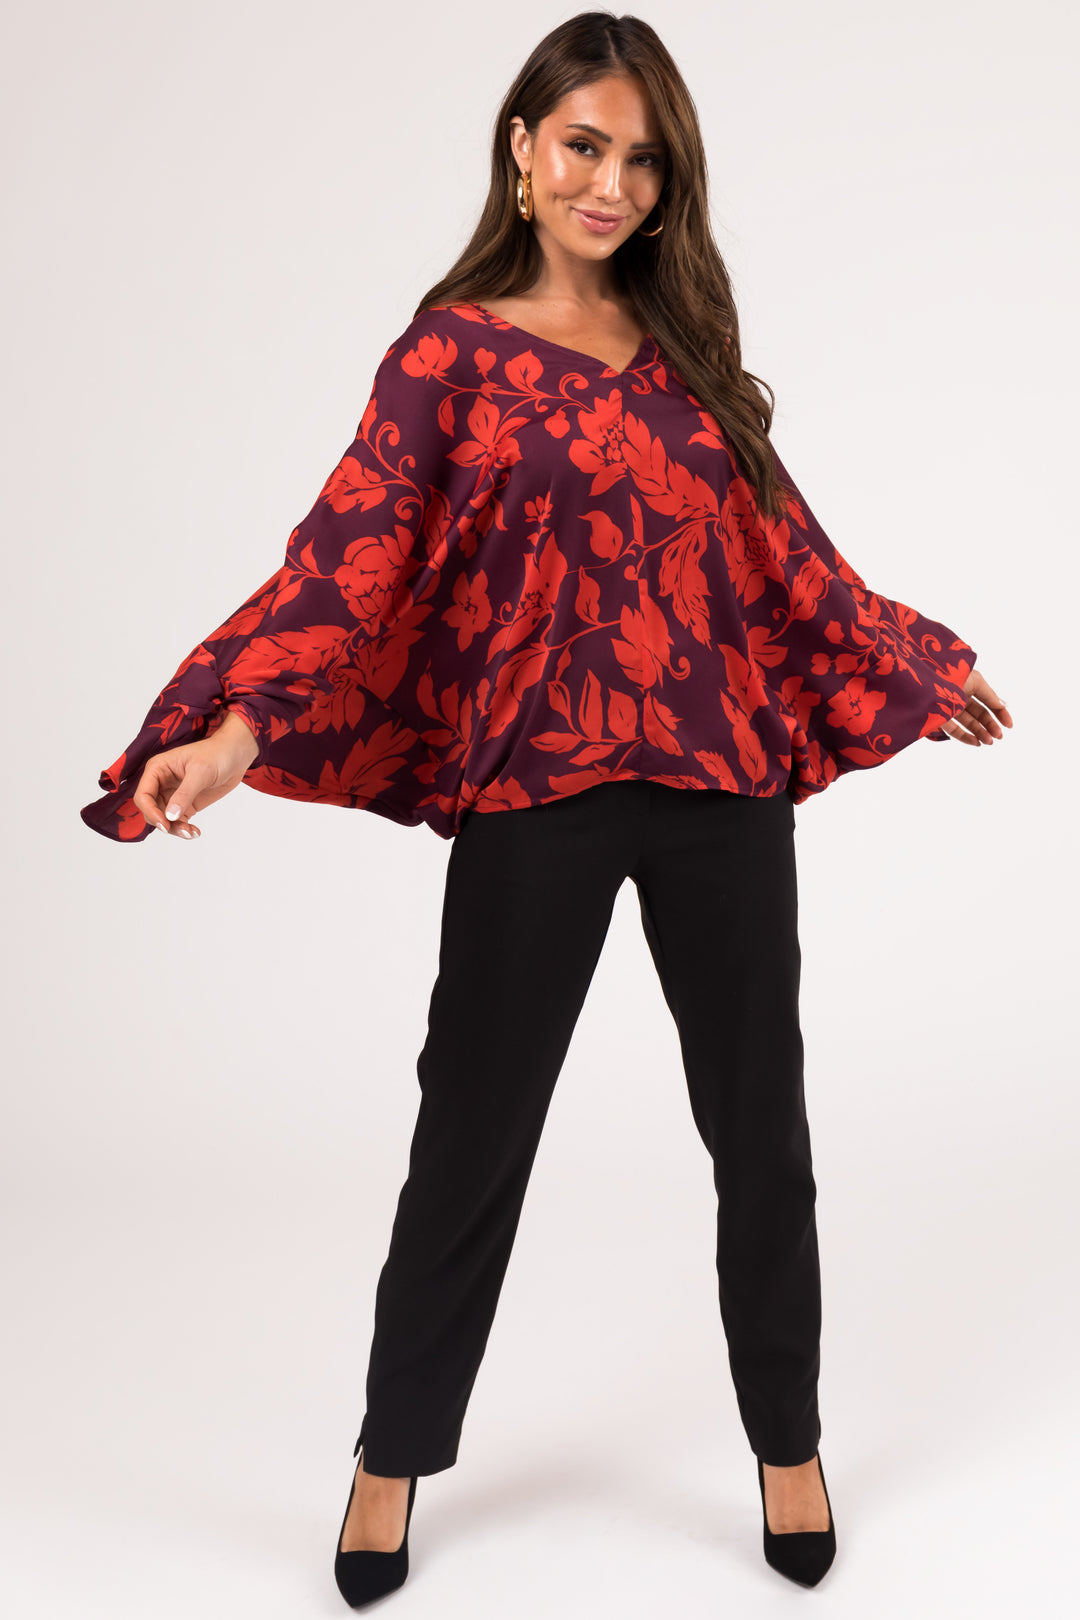 Eggplant and Scarlet Floral Dolman Sleeve Satin Top & Lime Lush